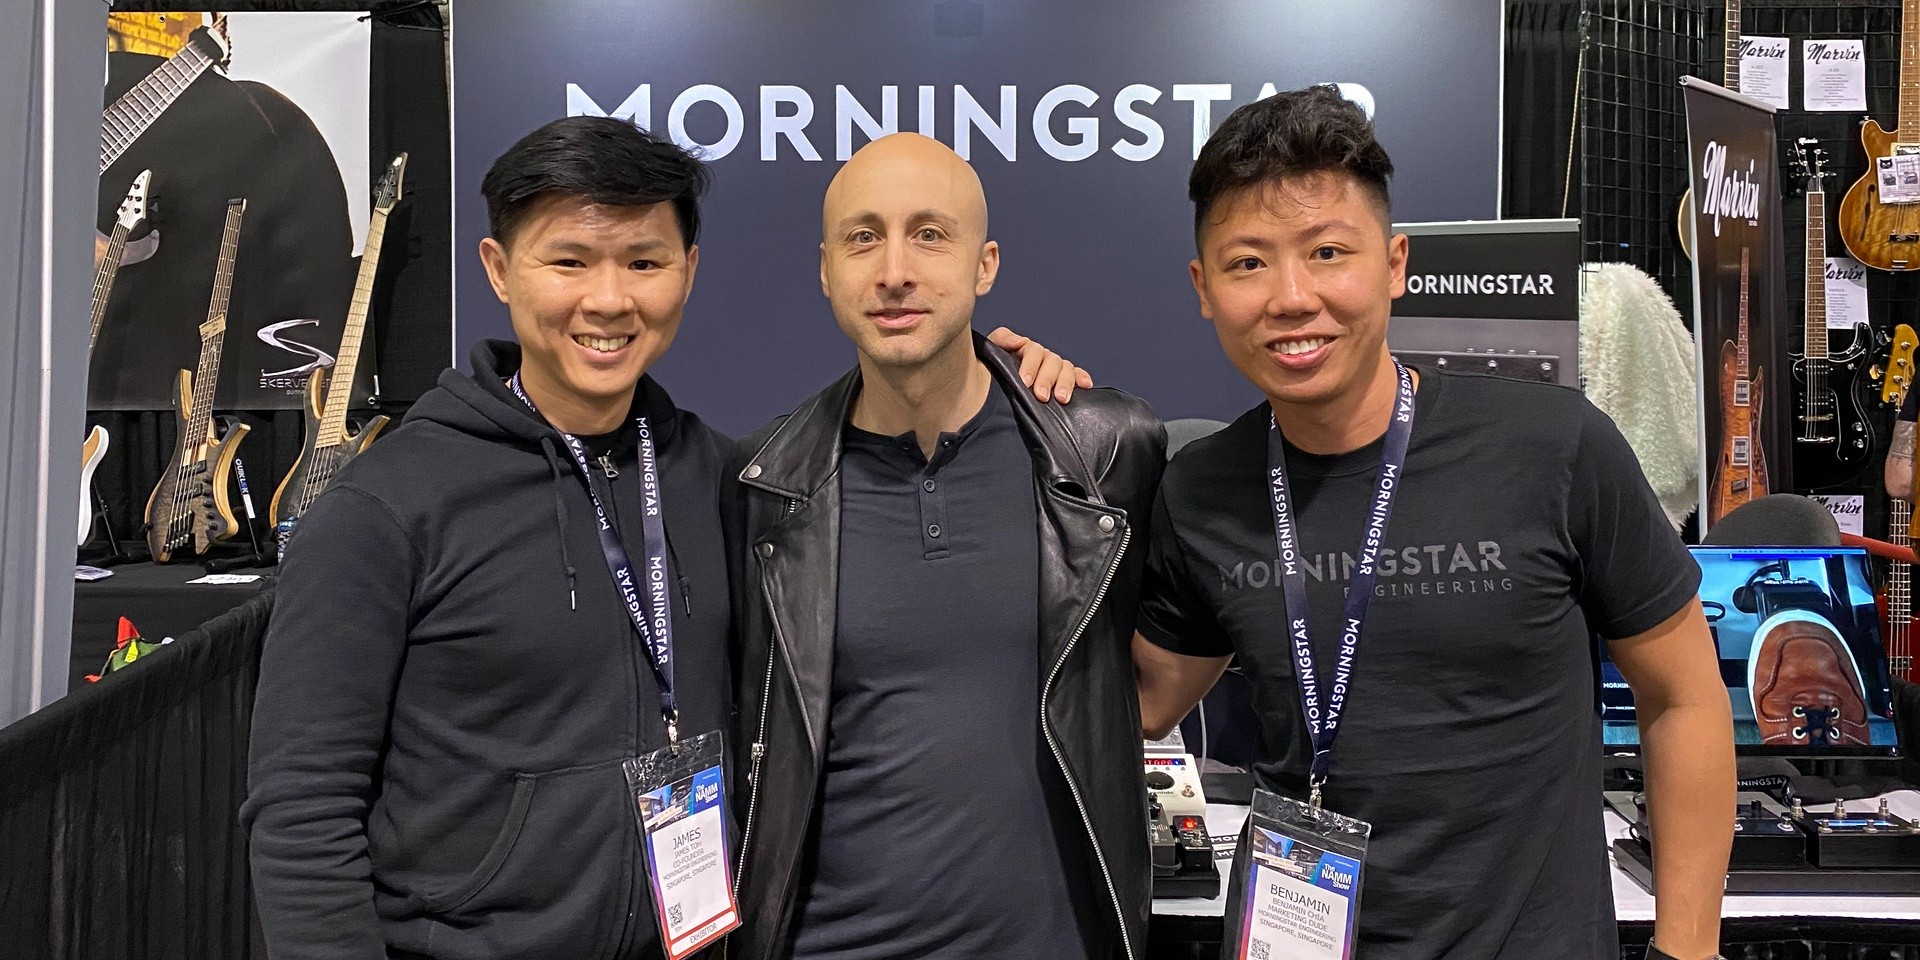 Sharing the stage with Ellie Goulding and Simple Plan - Singaporean MIDI controller makers Morningstar Engineering share their journey